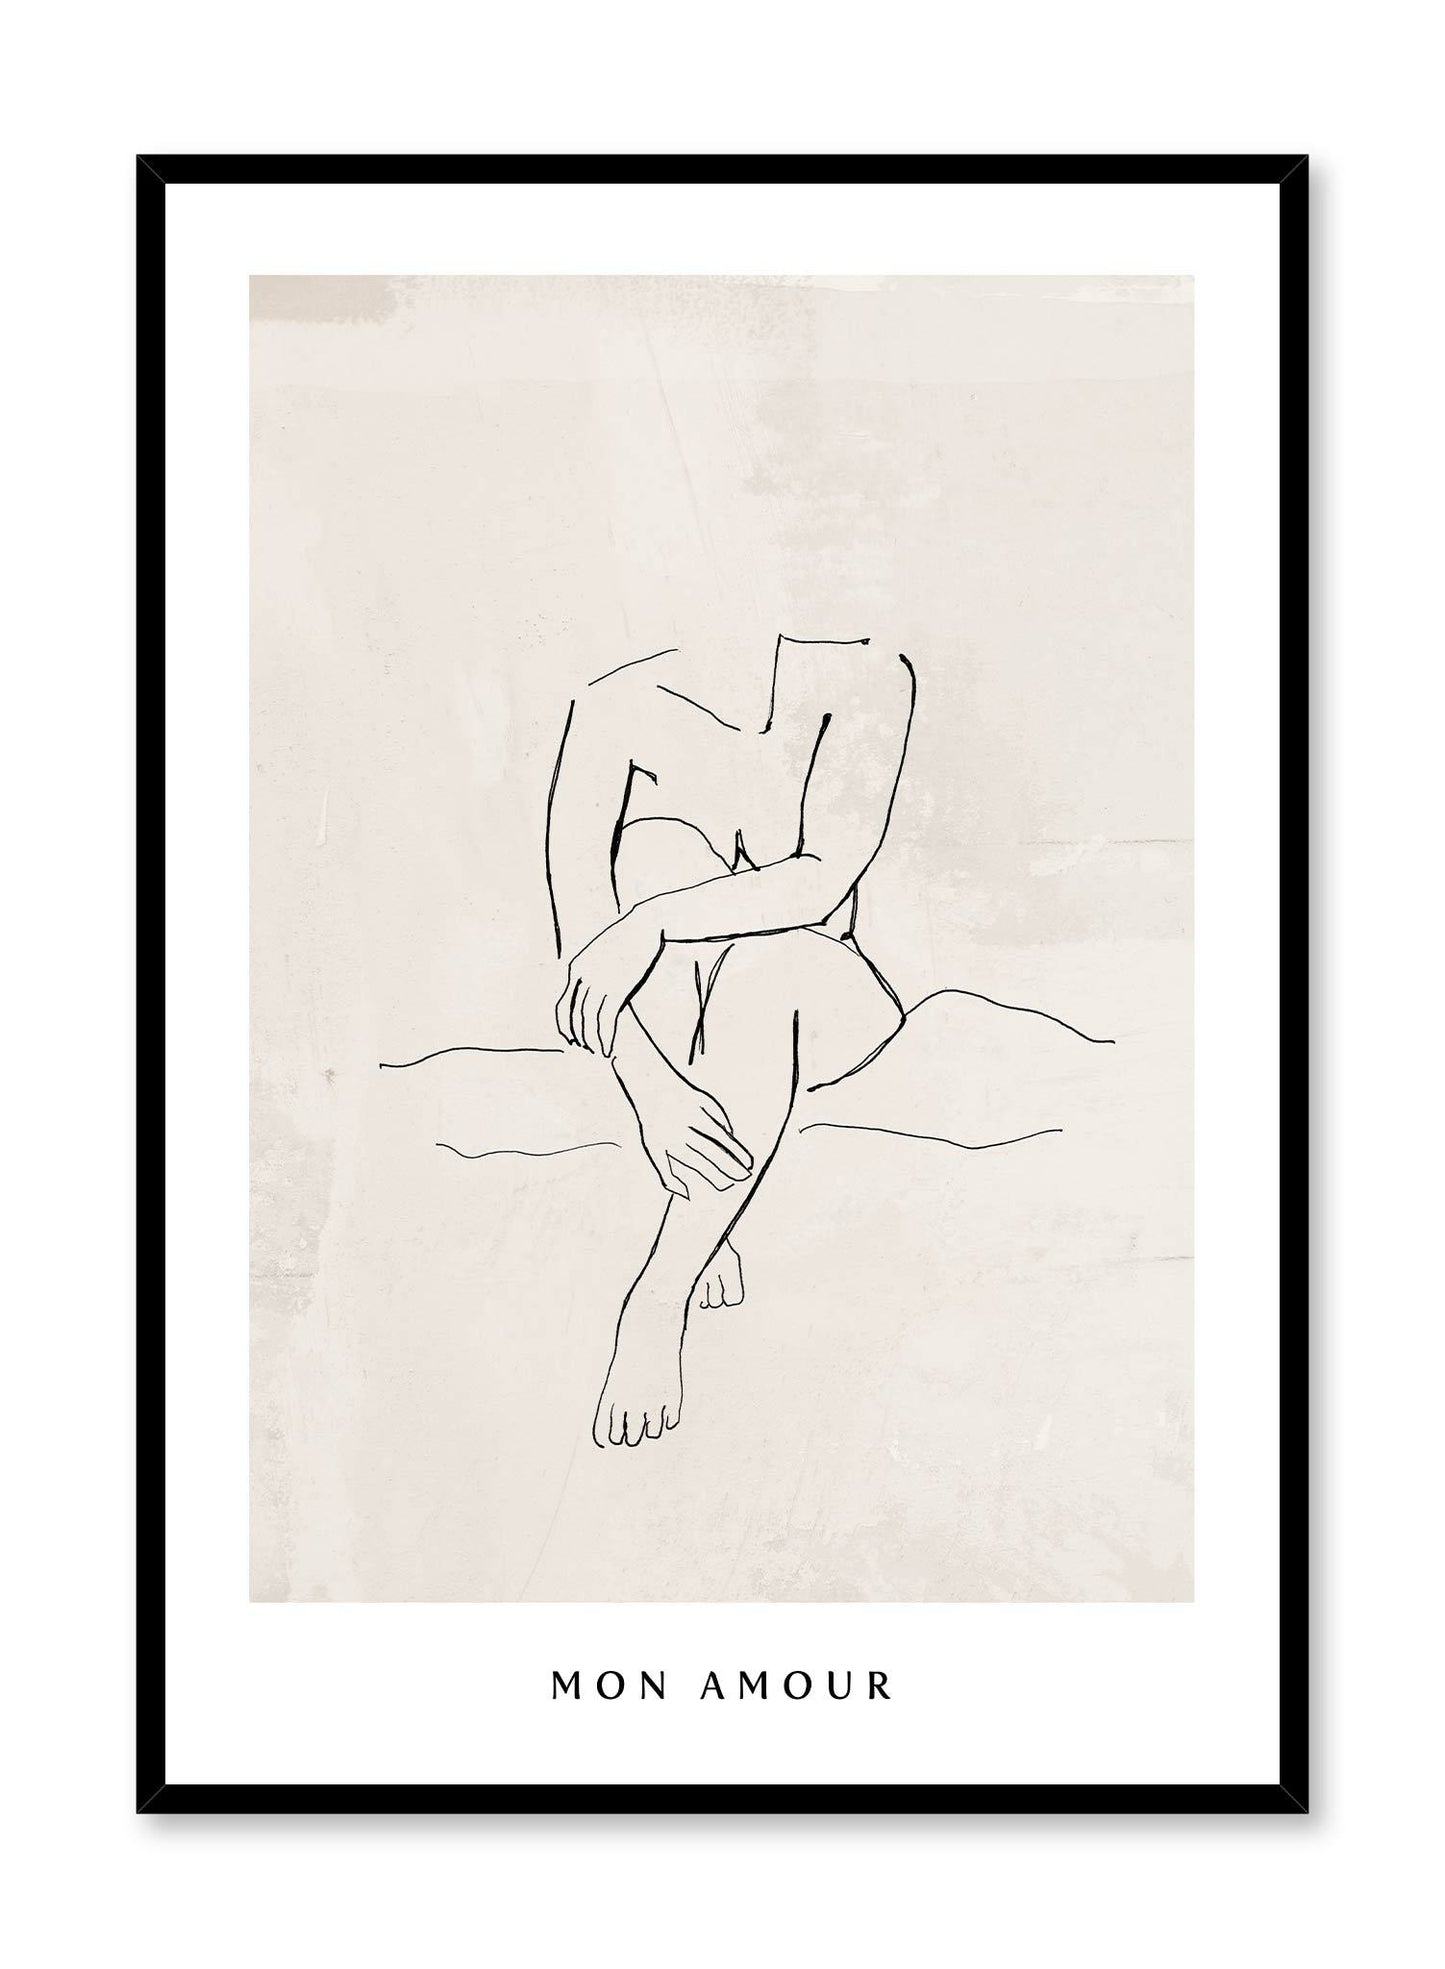 Aurora is a line art illustration of a naked woman sitting on a bed by Opposite Wall.